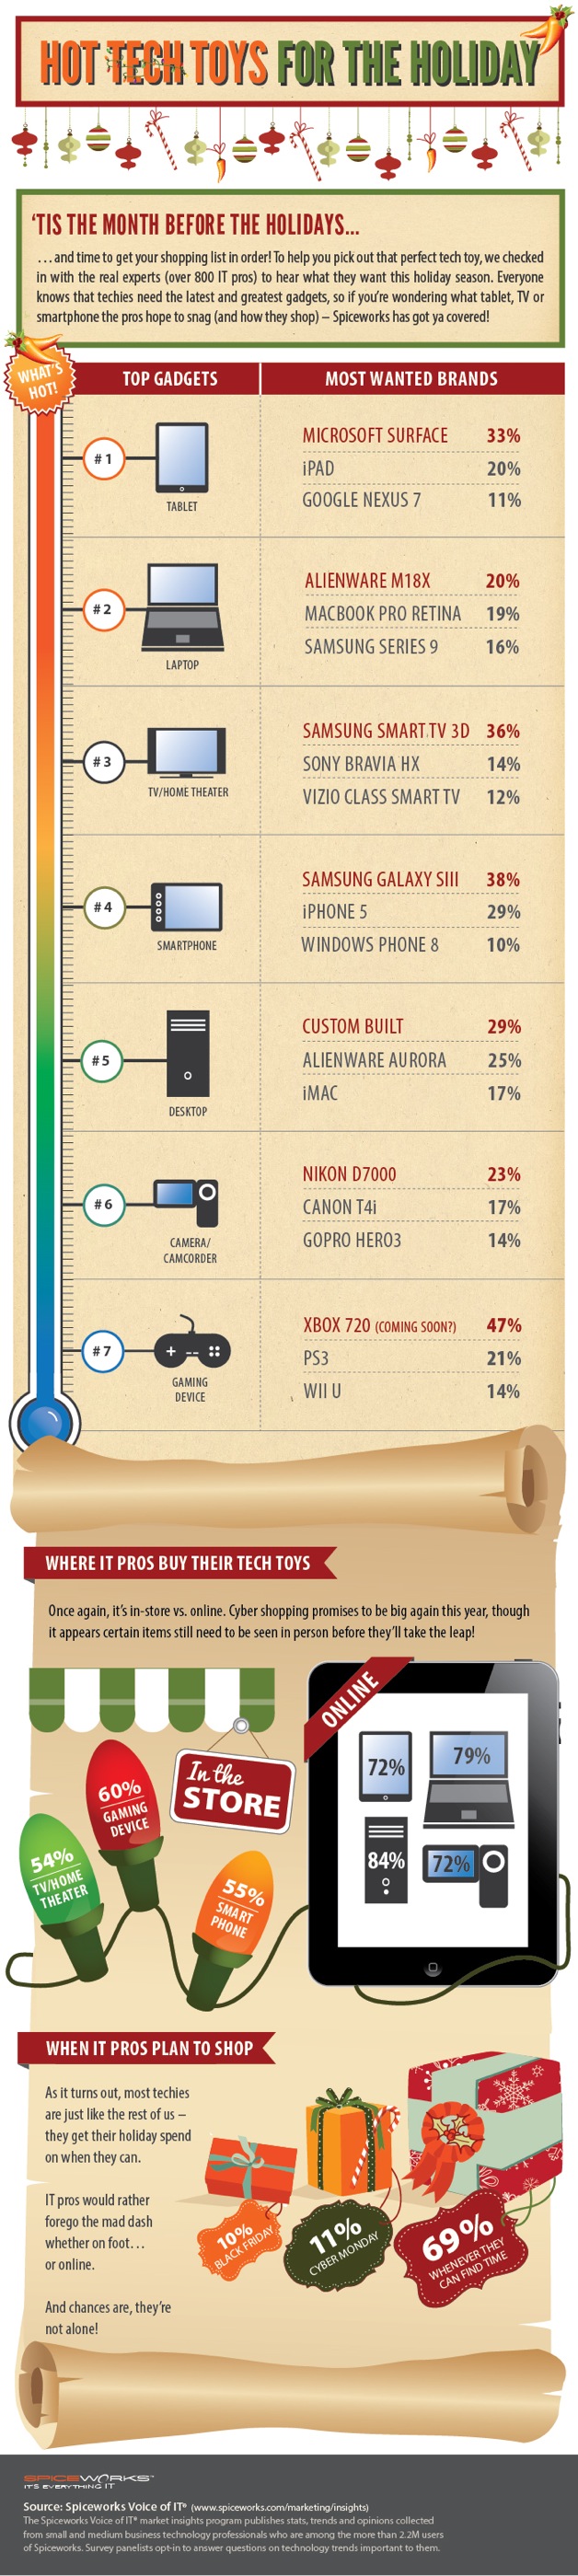 best tech gadgets for christmas 2012-Infographic